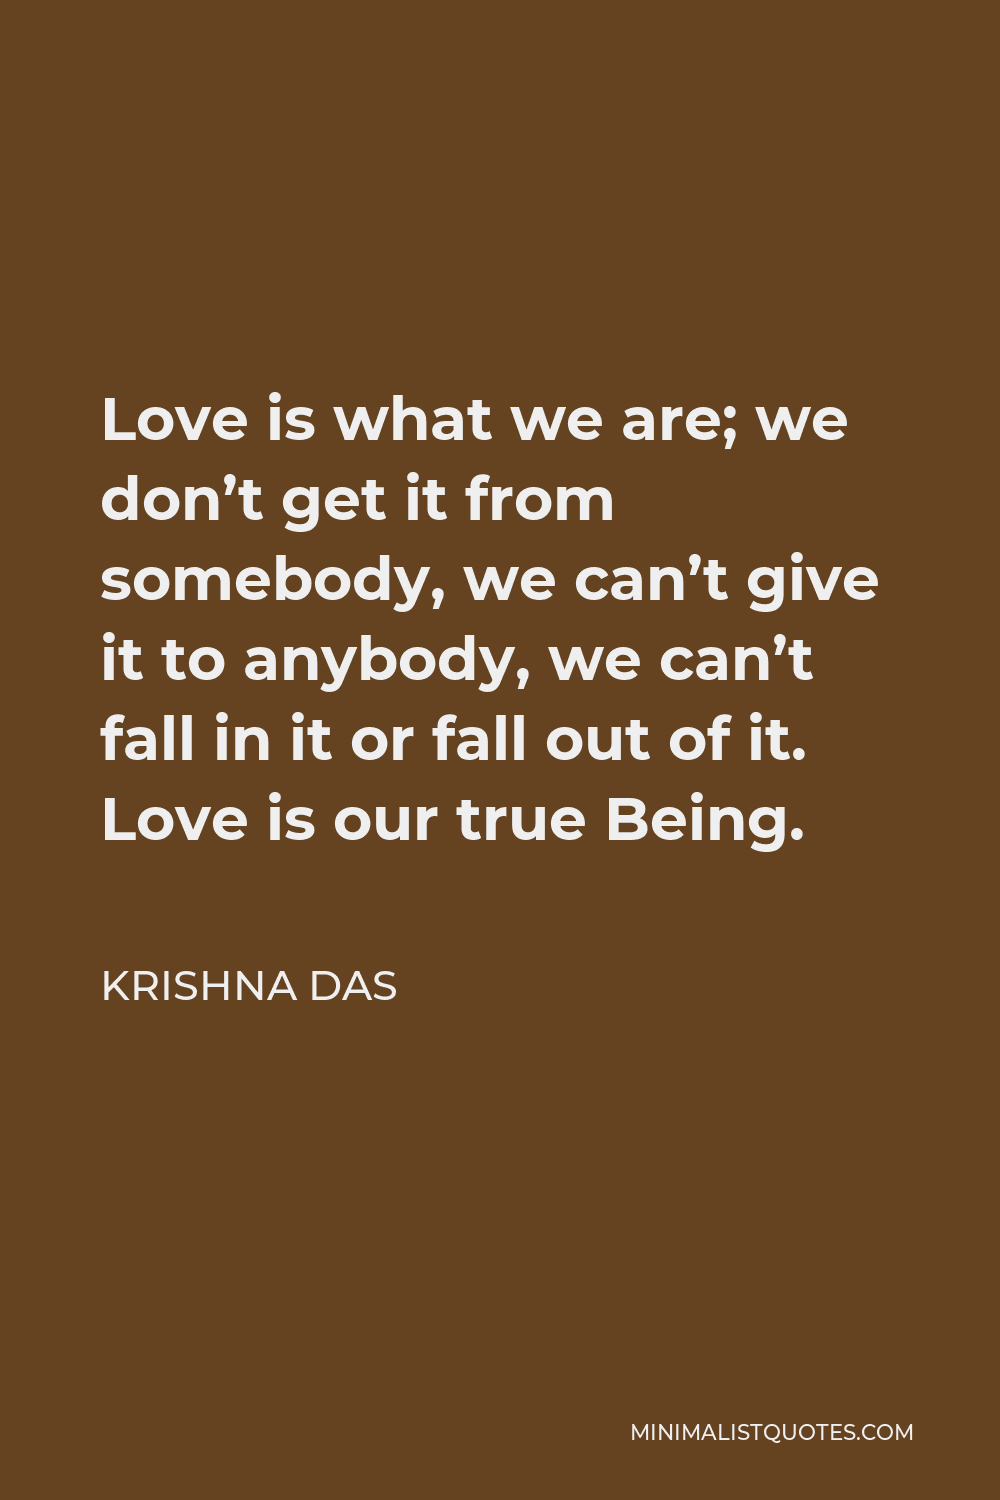 Krishna Das Quote - Love is what we are; we don’t get it from somebody, we can’t give it to anybody, we can’t fall in it or fall out of it. Love is our true Being.